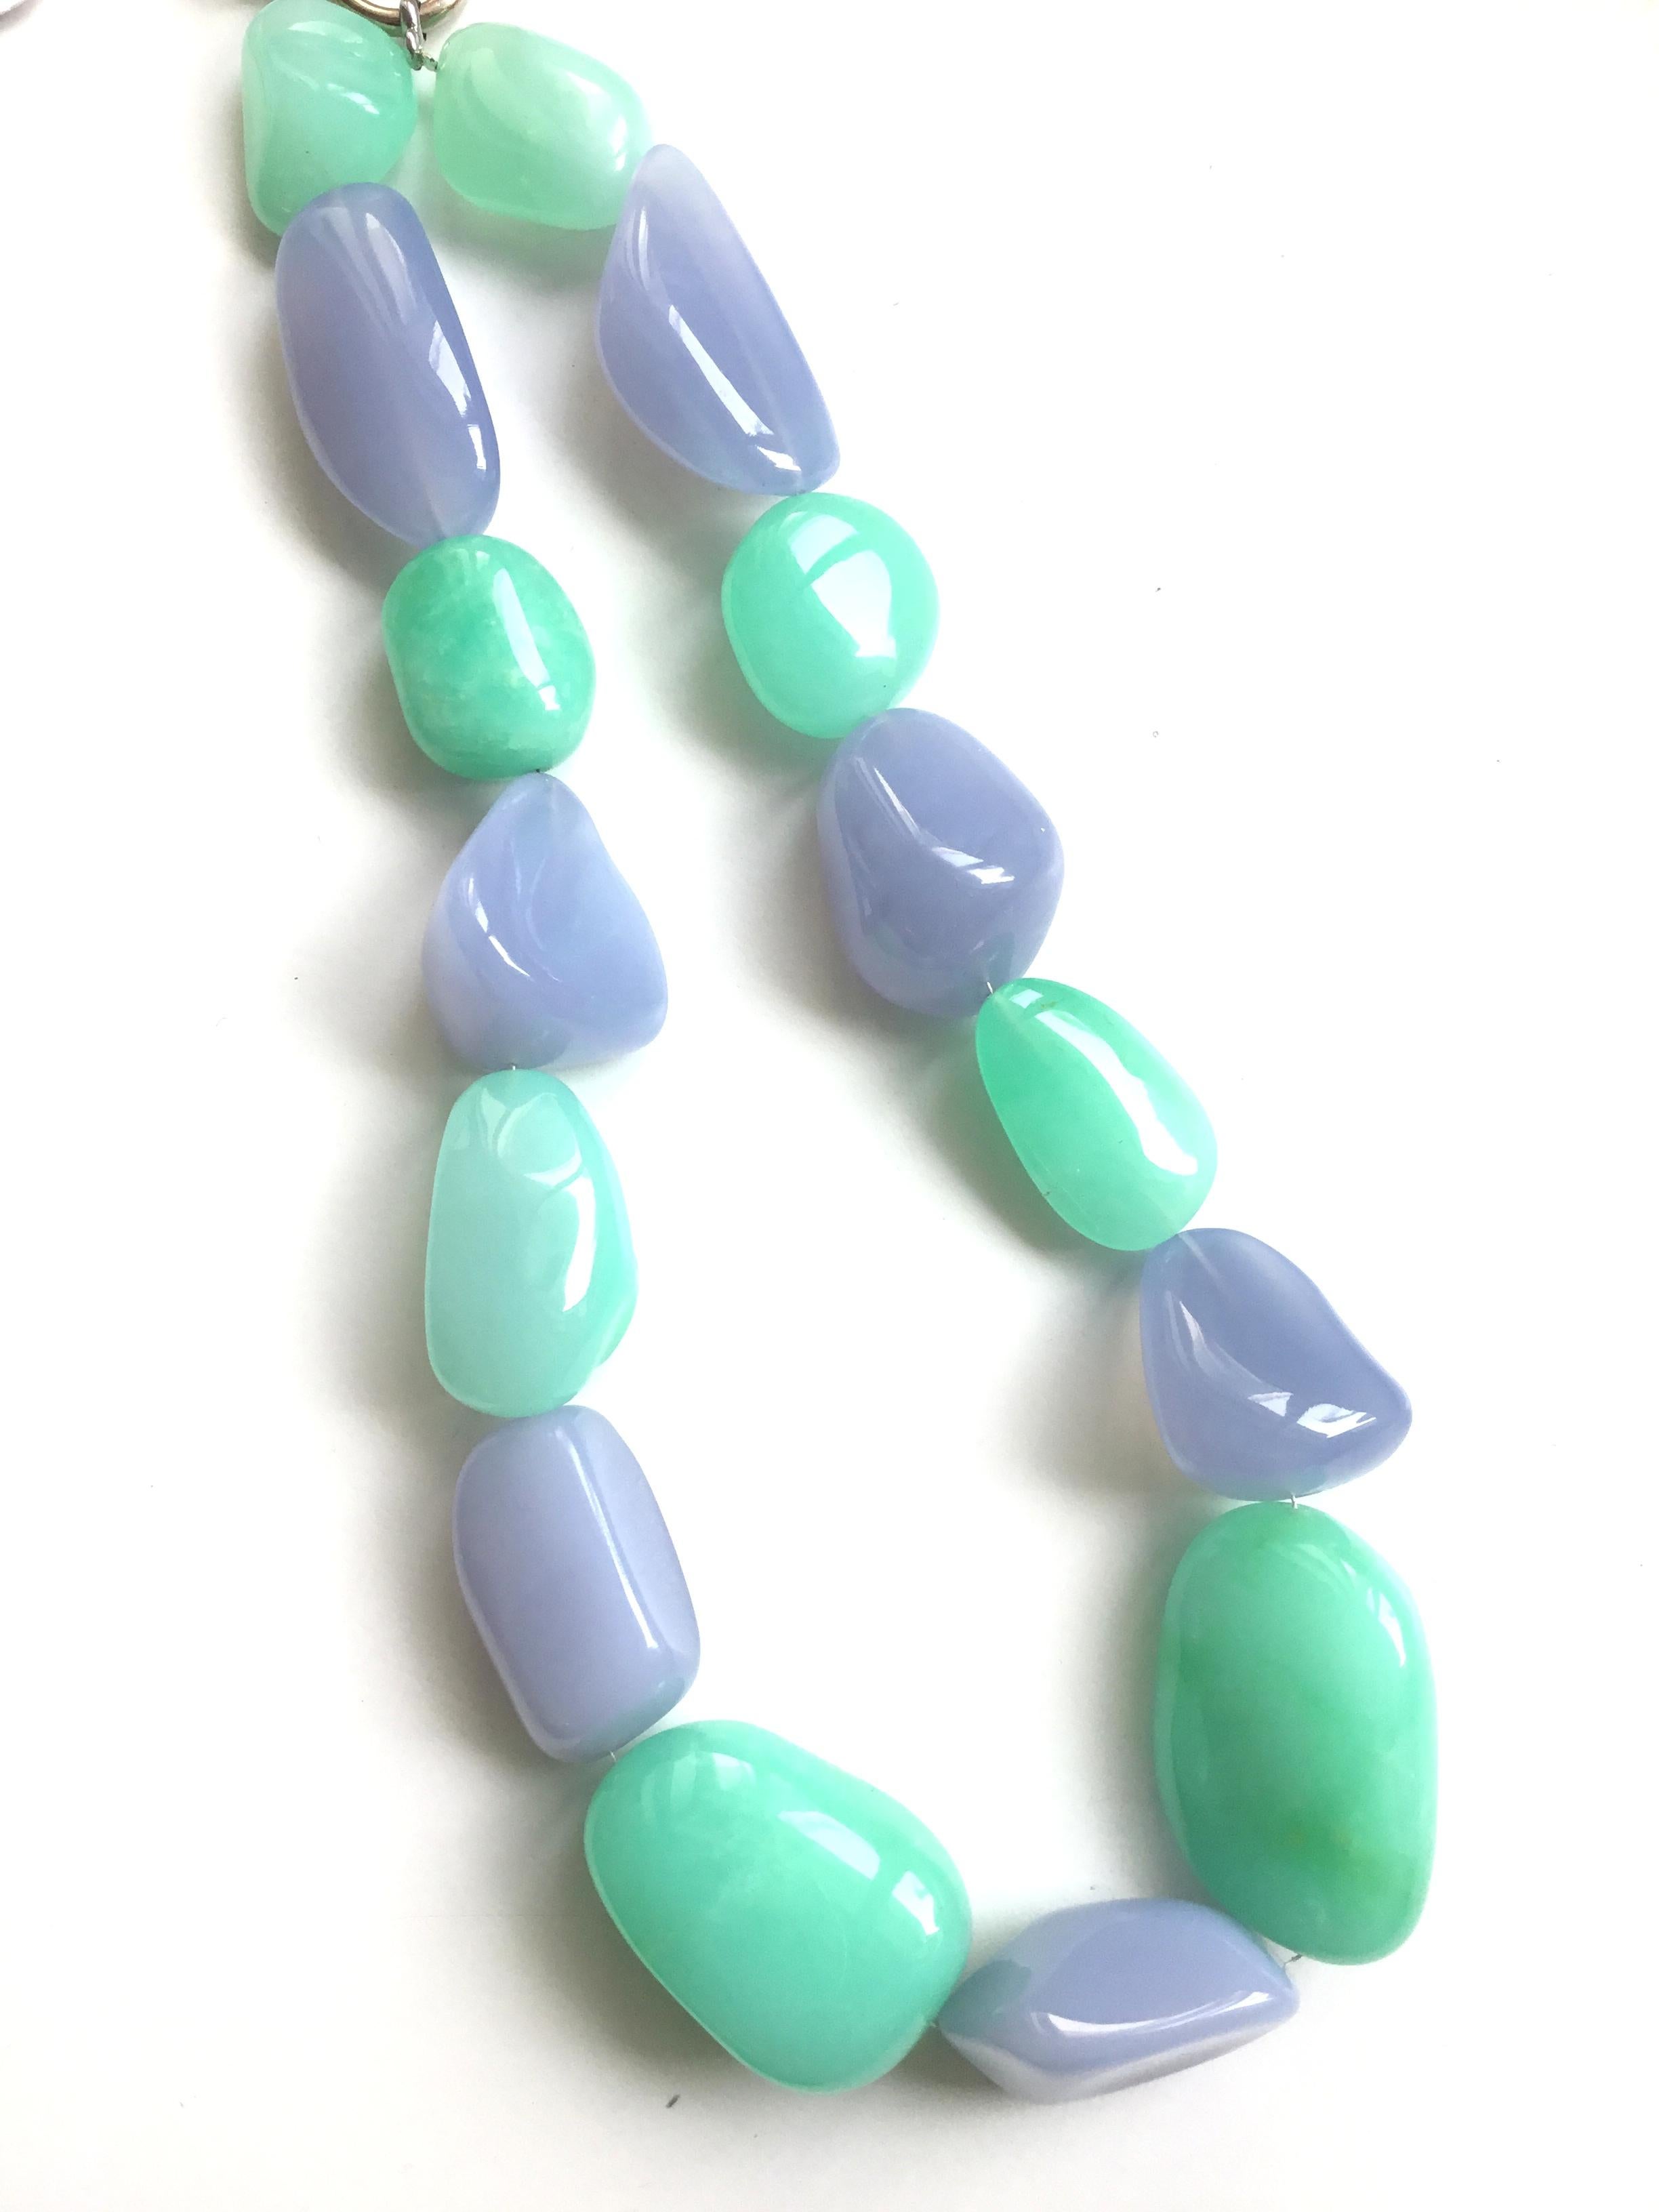 Top Quality Mix Chalcedoney & Chrysoprase Tumbled Natural Gemstone Necklace 
Size : 10 x 15 TO 20 x 25 MM Beads
Weight : 1141.90 Carats
Length Of Necklace : 16 Inches